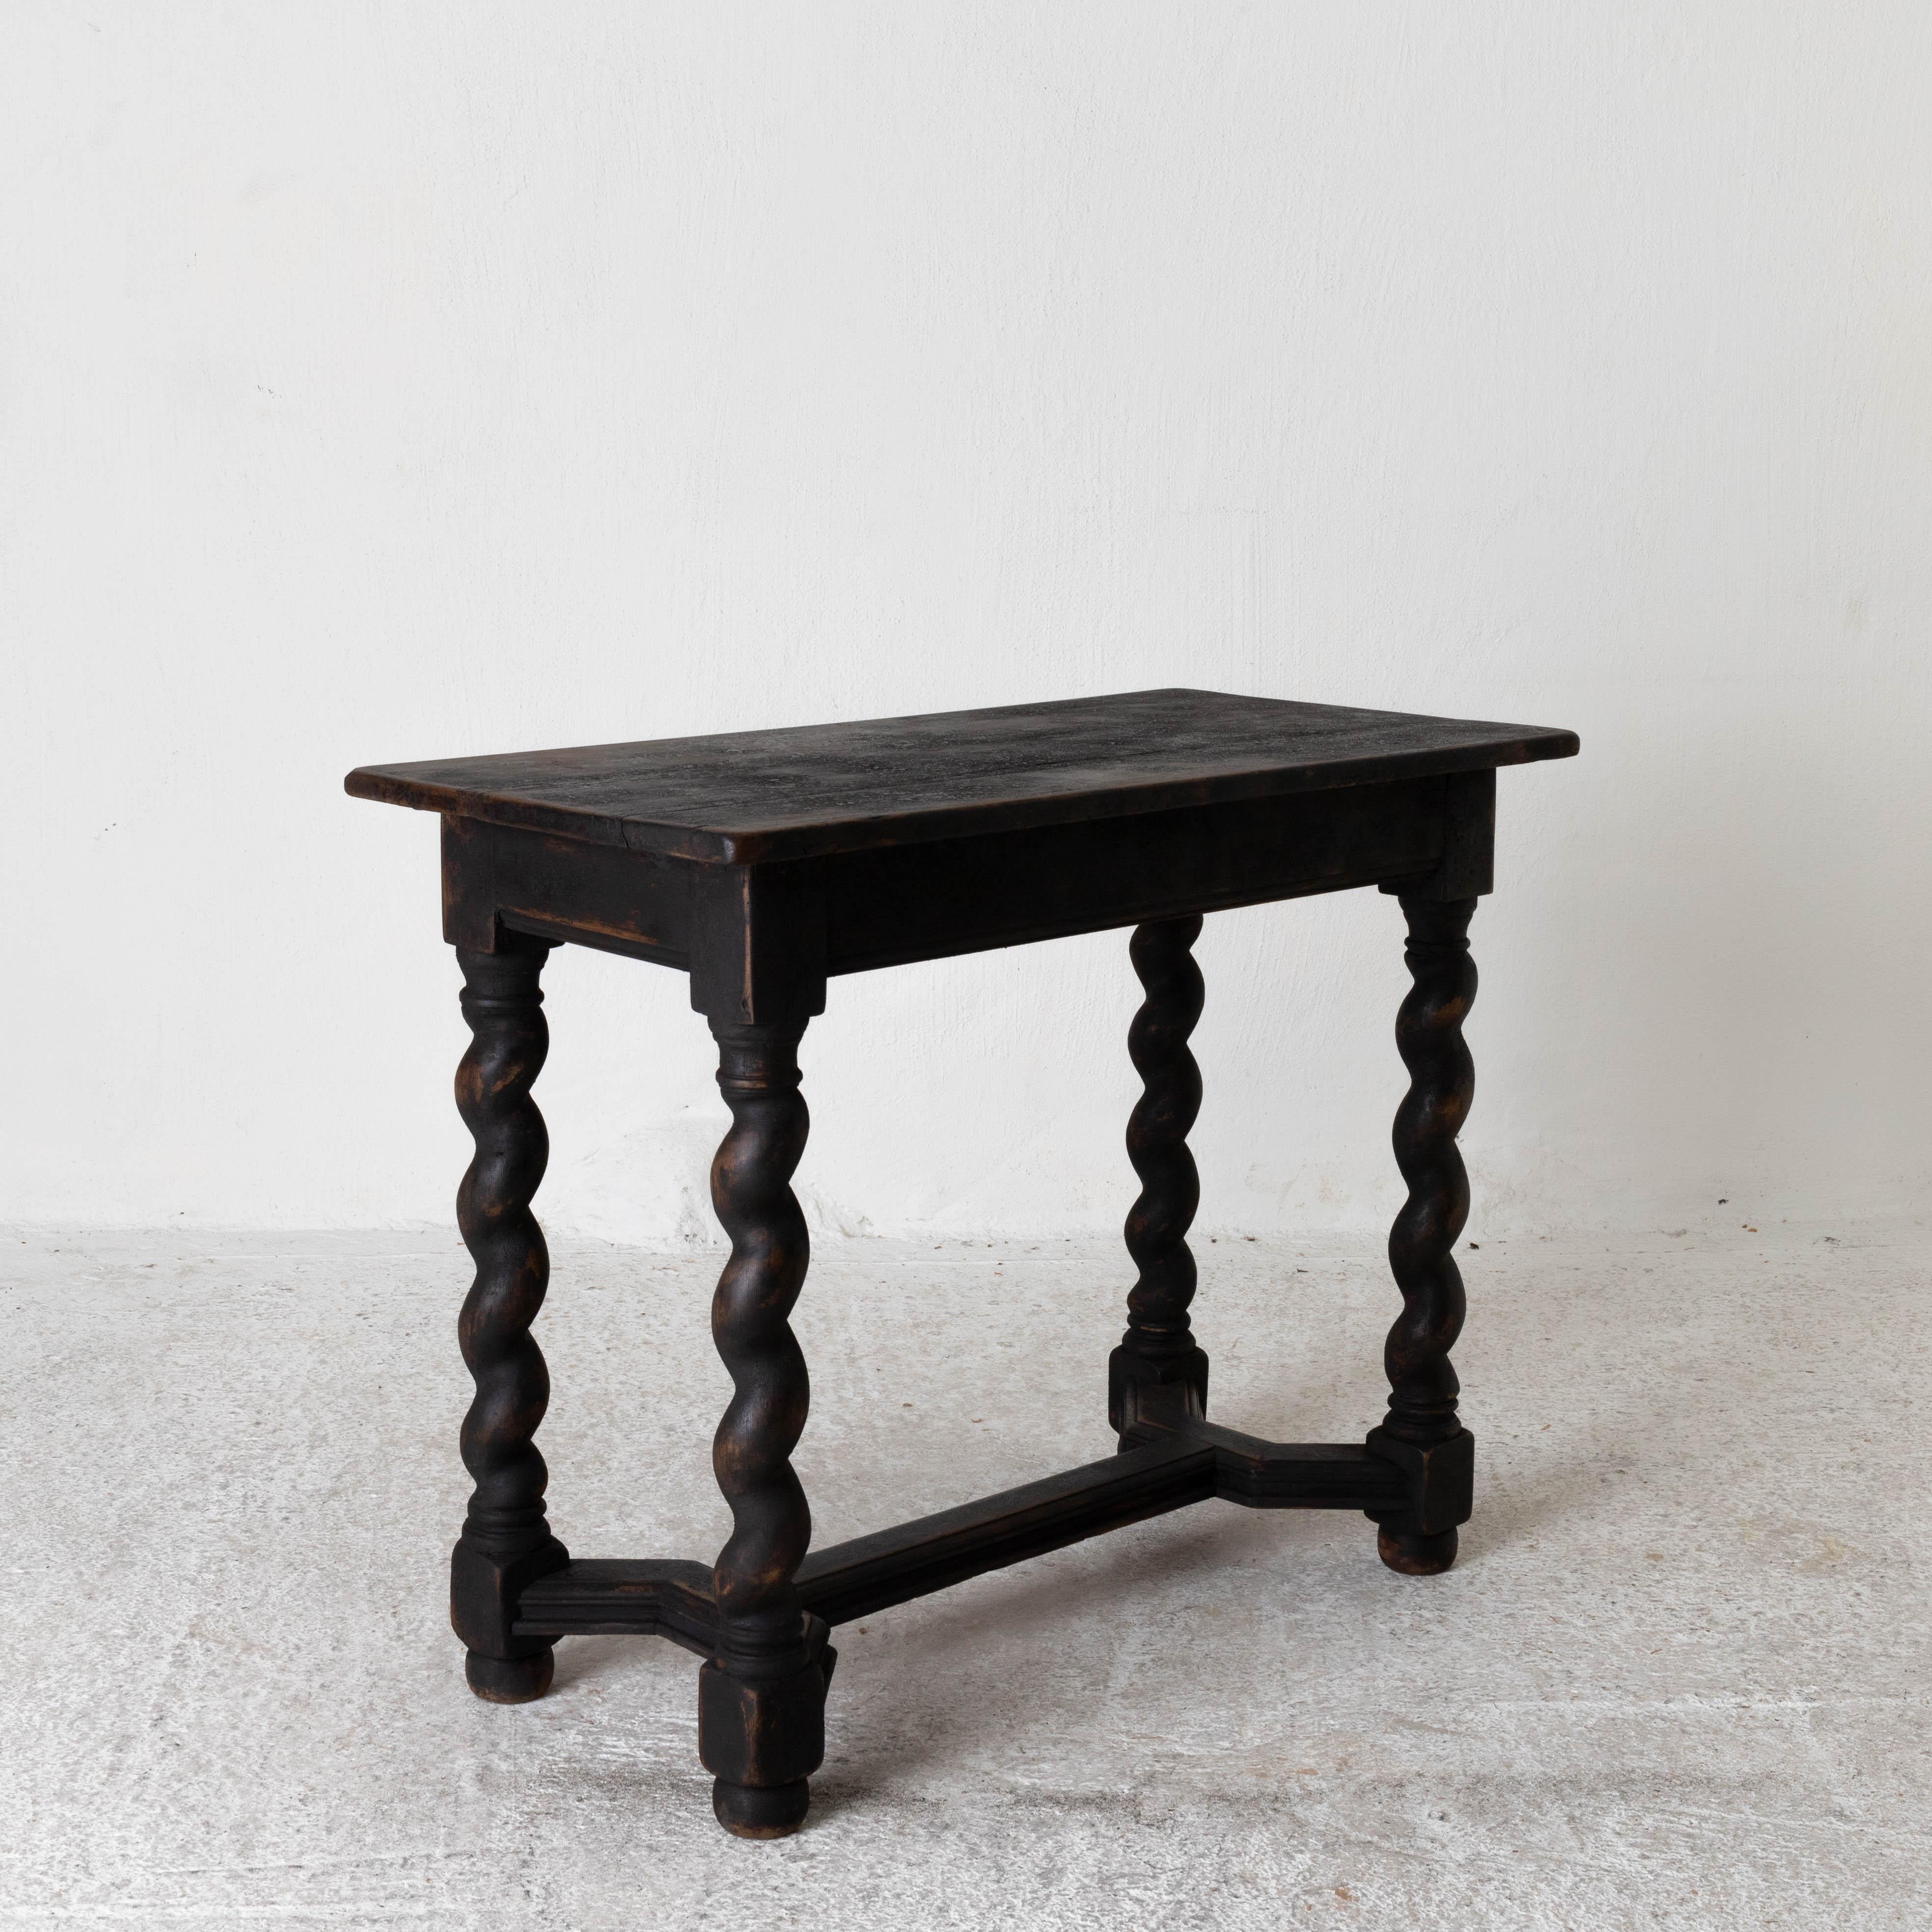 Table side Swedish Baroque black 18th century spiral legs, Sweden. A table made during the Baroque, period 1650-1750. Rectangular top on a base with spiral legs tied together with a foot cross. Refinished in our Laserow black. Perfect size for a